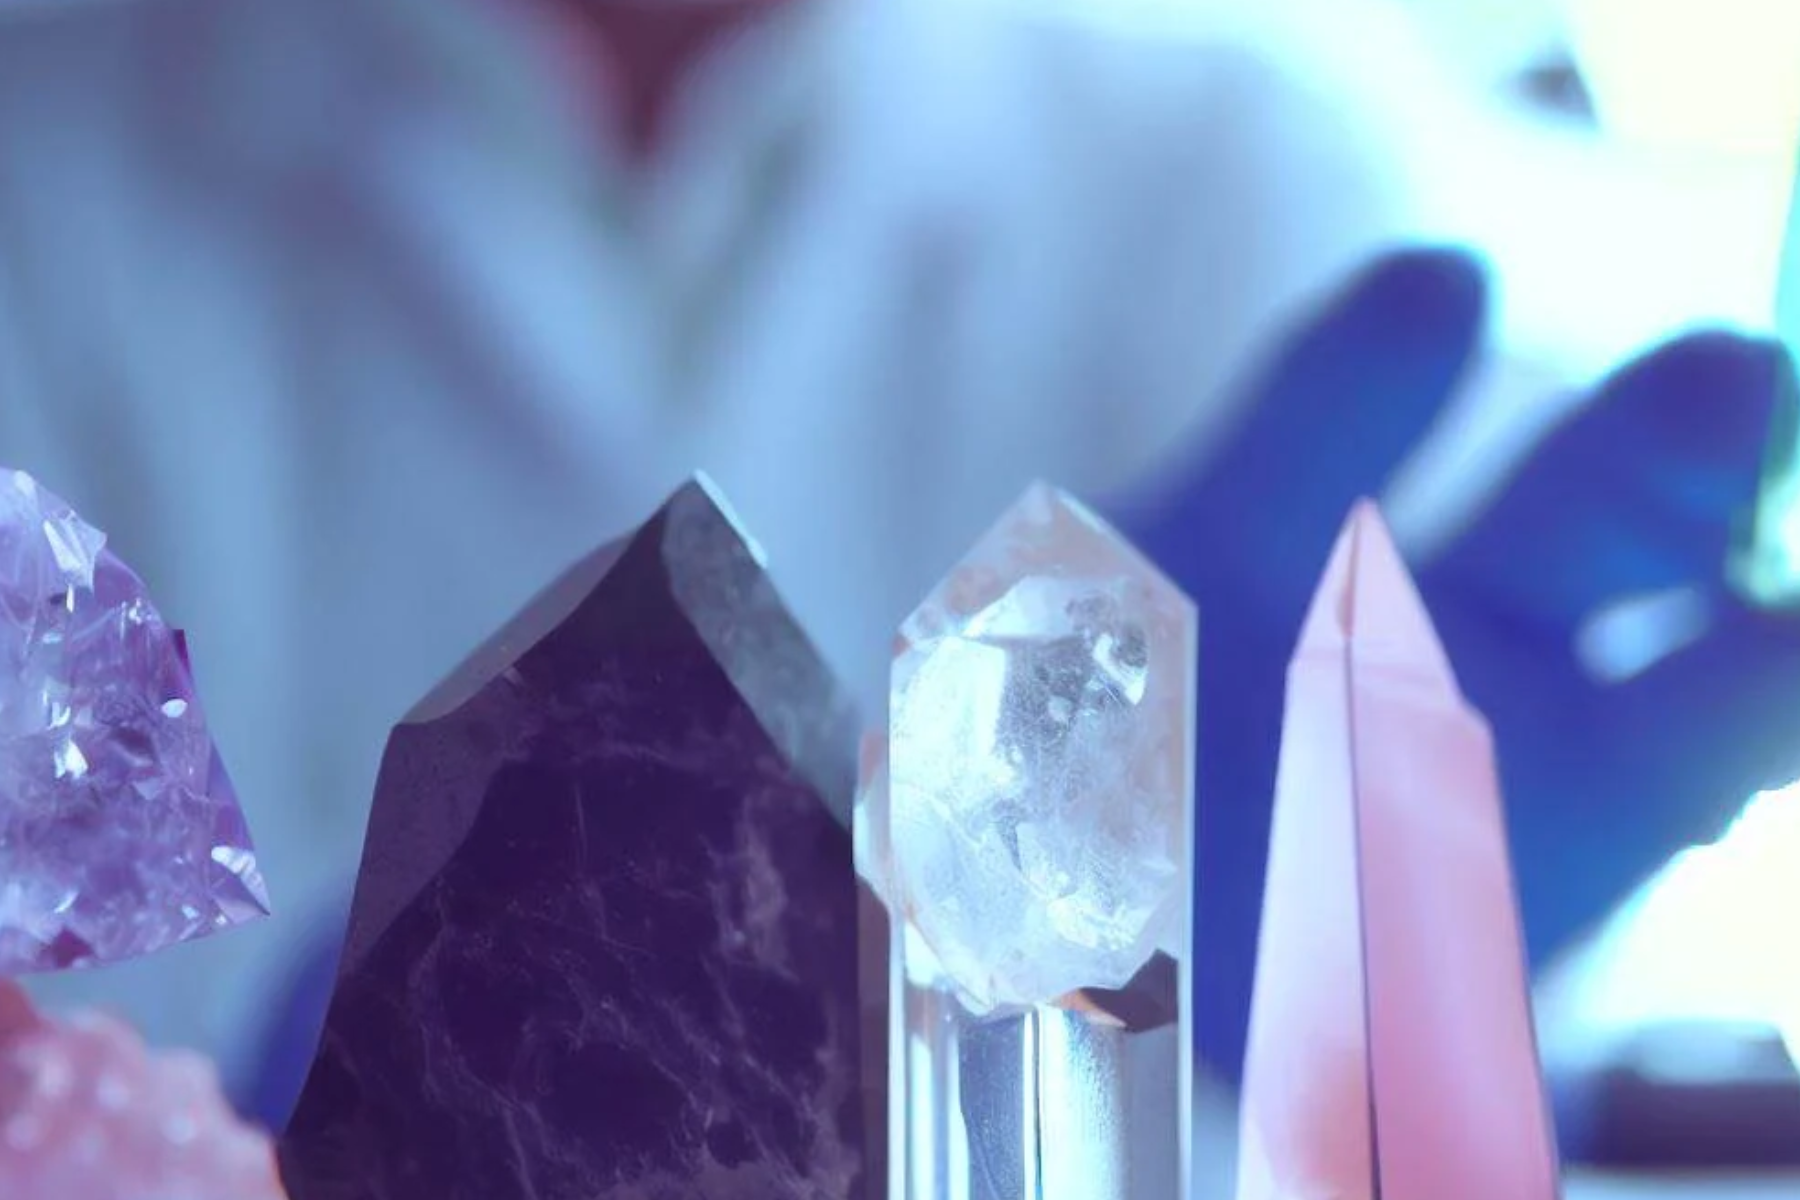 A scientist stands in front of the gems